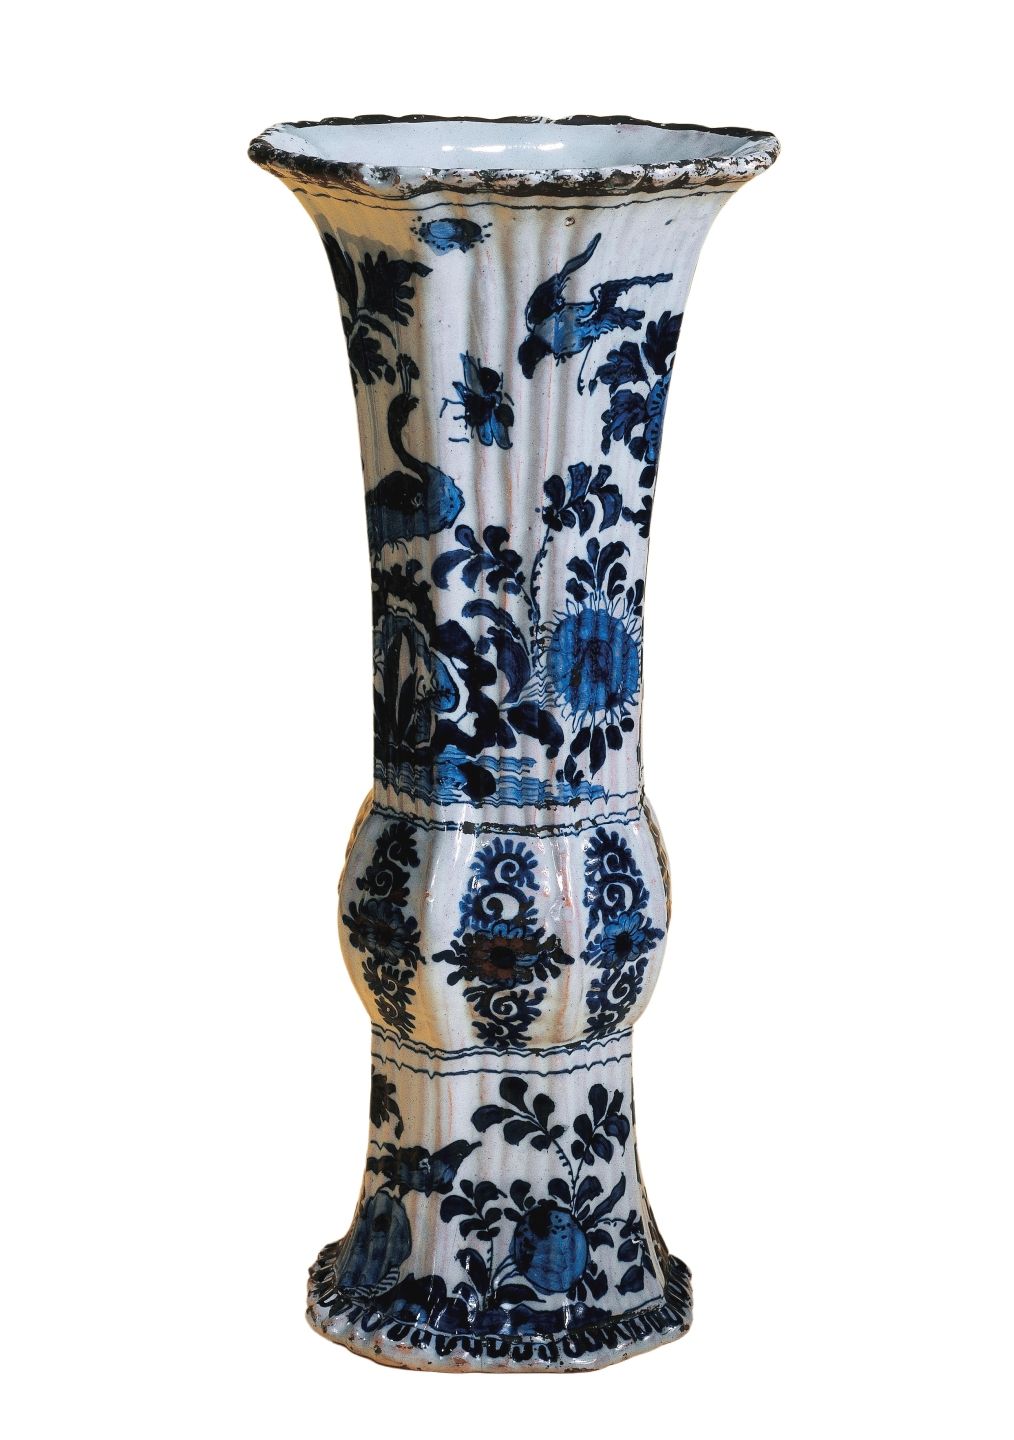 berlin-faience-vase-ribbed-wolbeer-17th-century